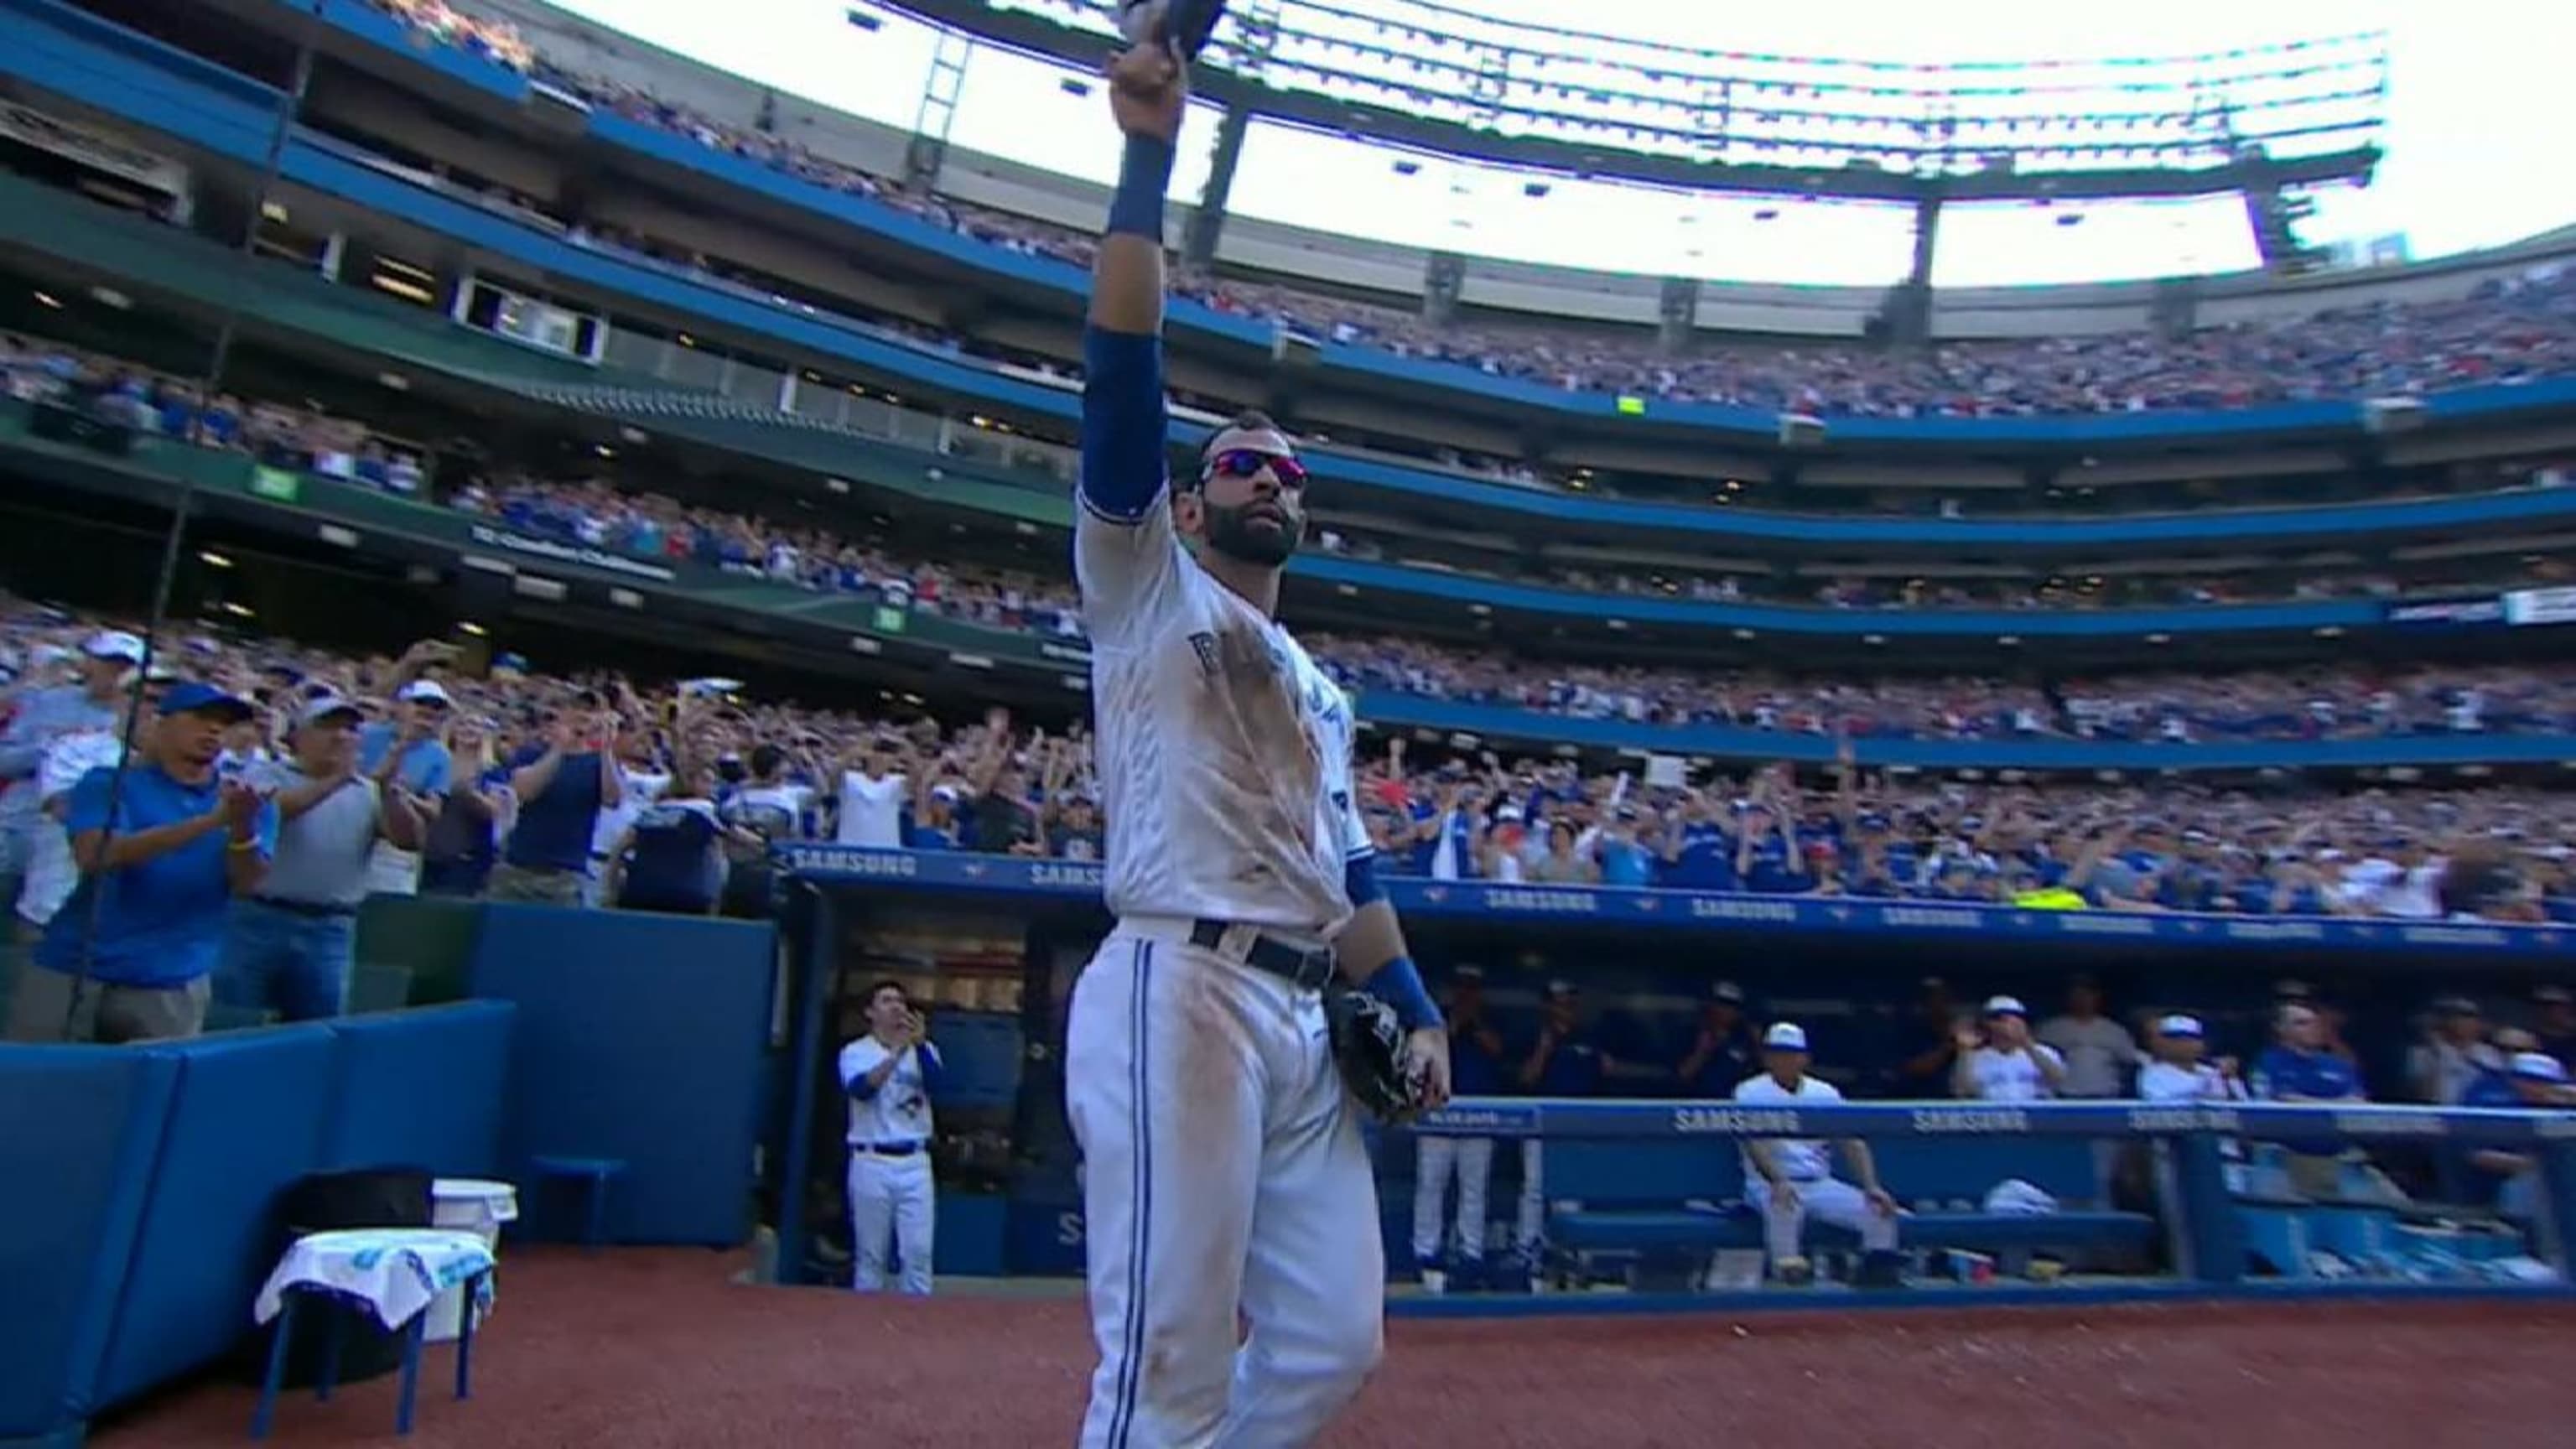 MLB Rumor Central: Jose Bautista open to re-signing with Jays